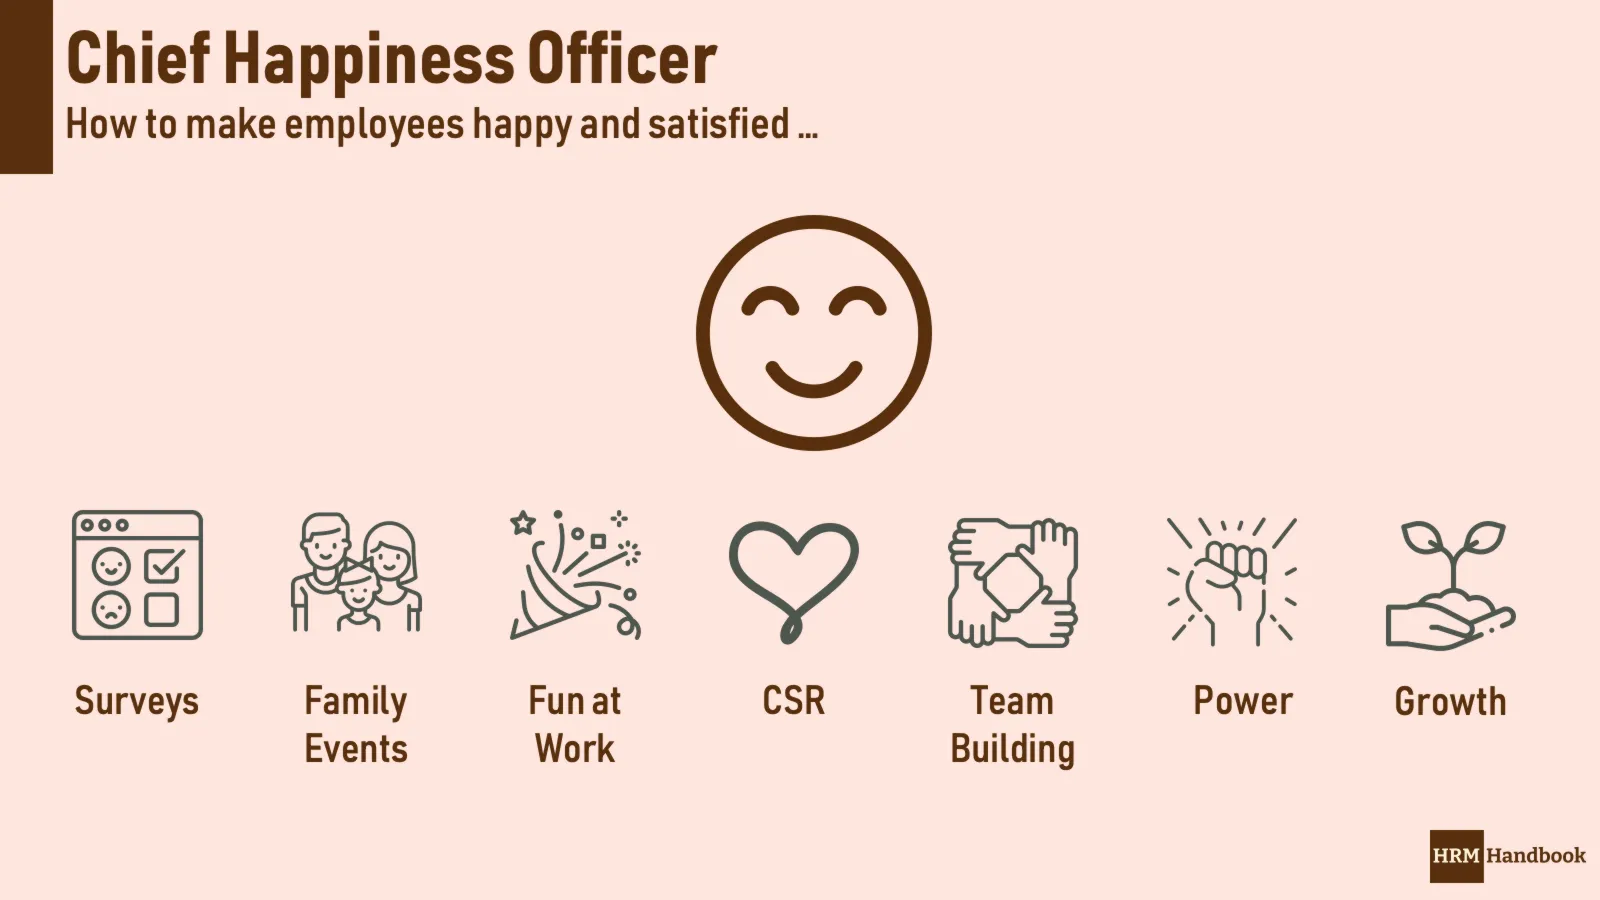 Chief Happiness Officer: Most common tools to improve employee morale and engagement